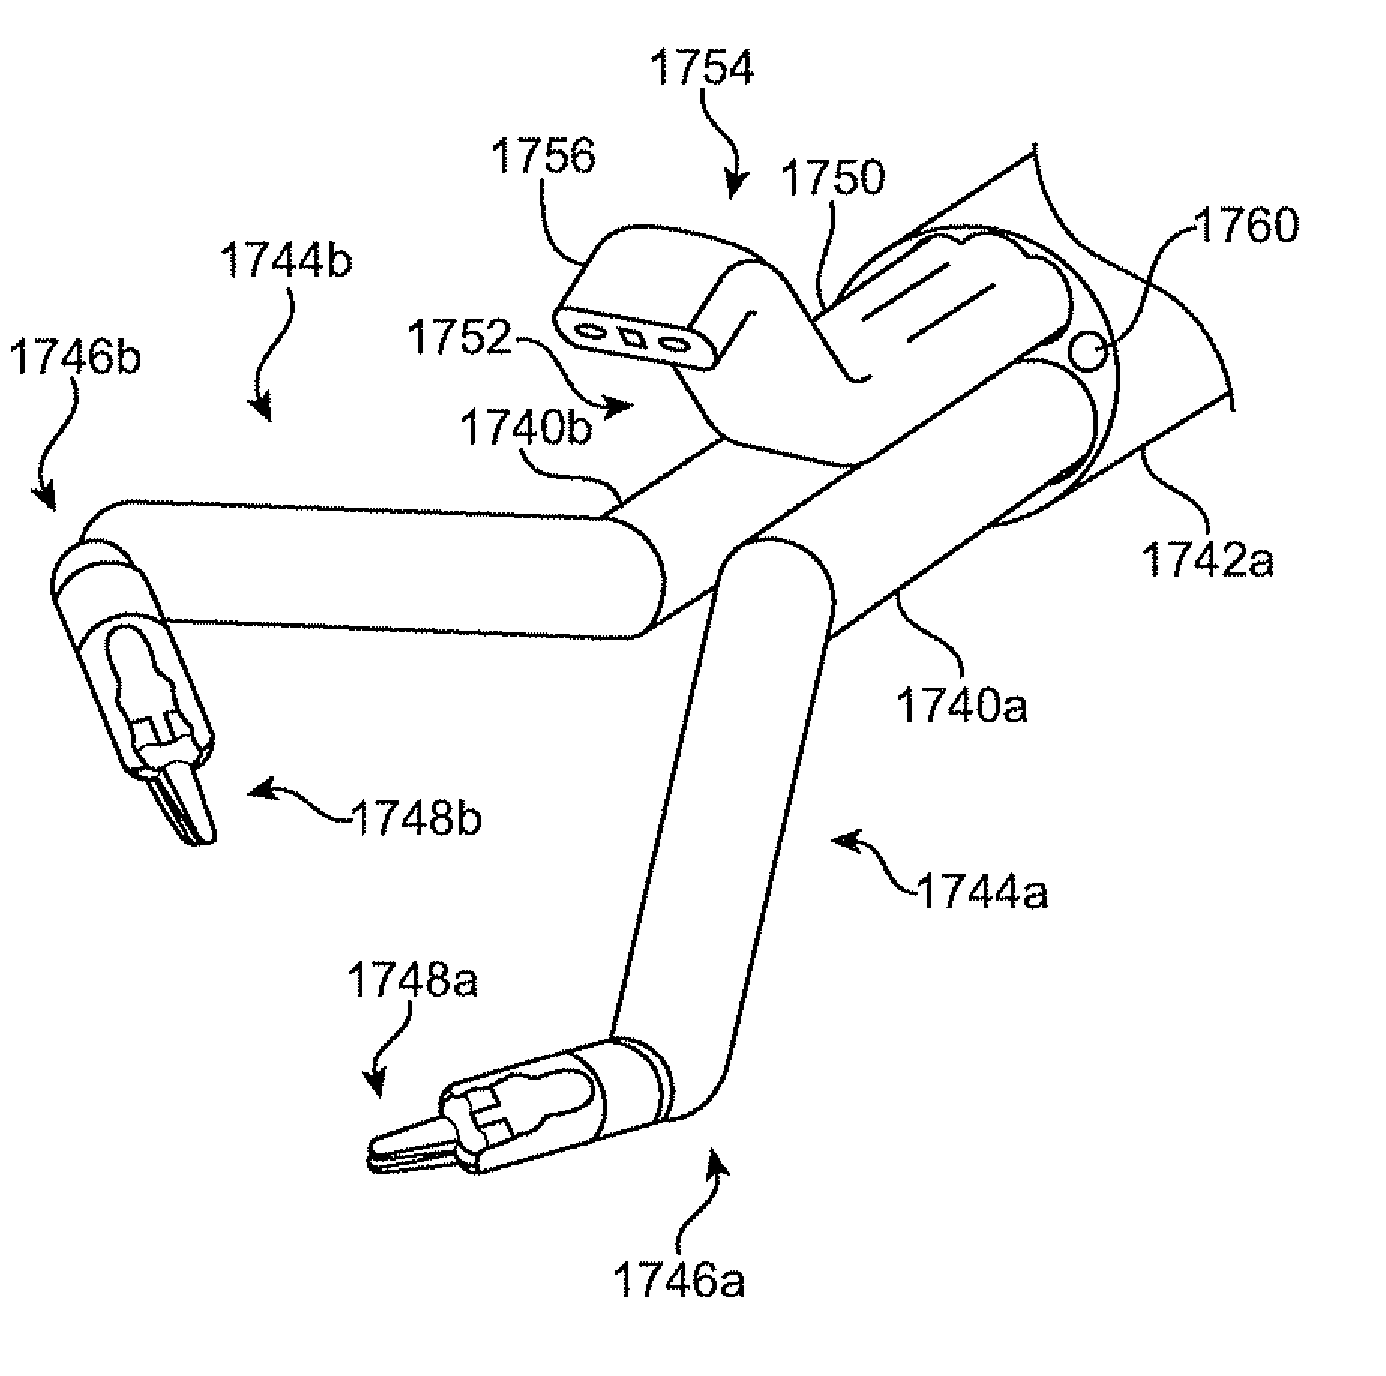 Side looking minimally invasive surgery instrument assembly